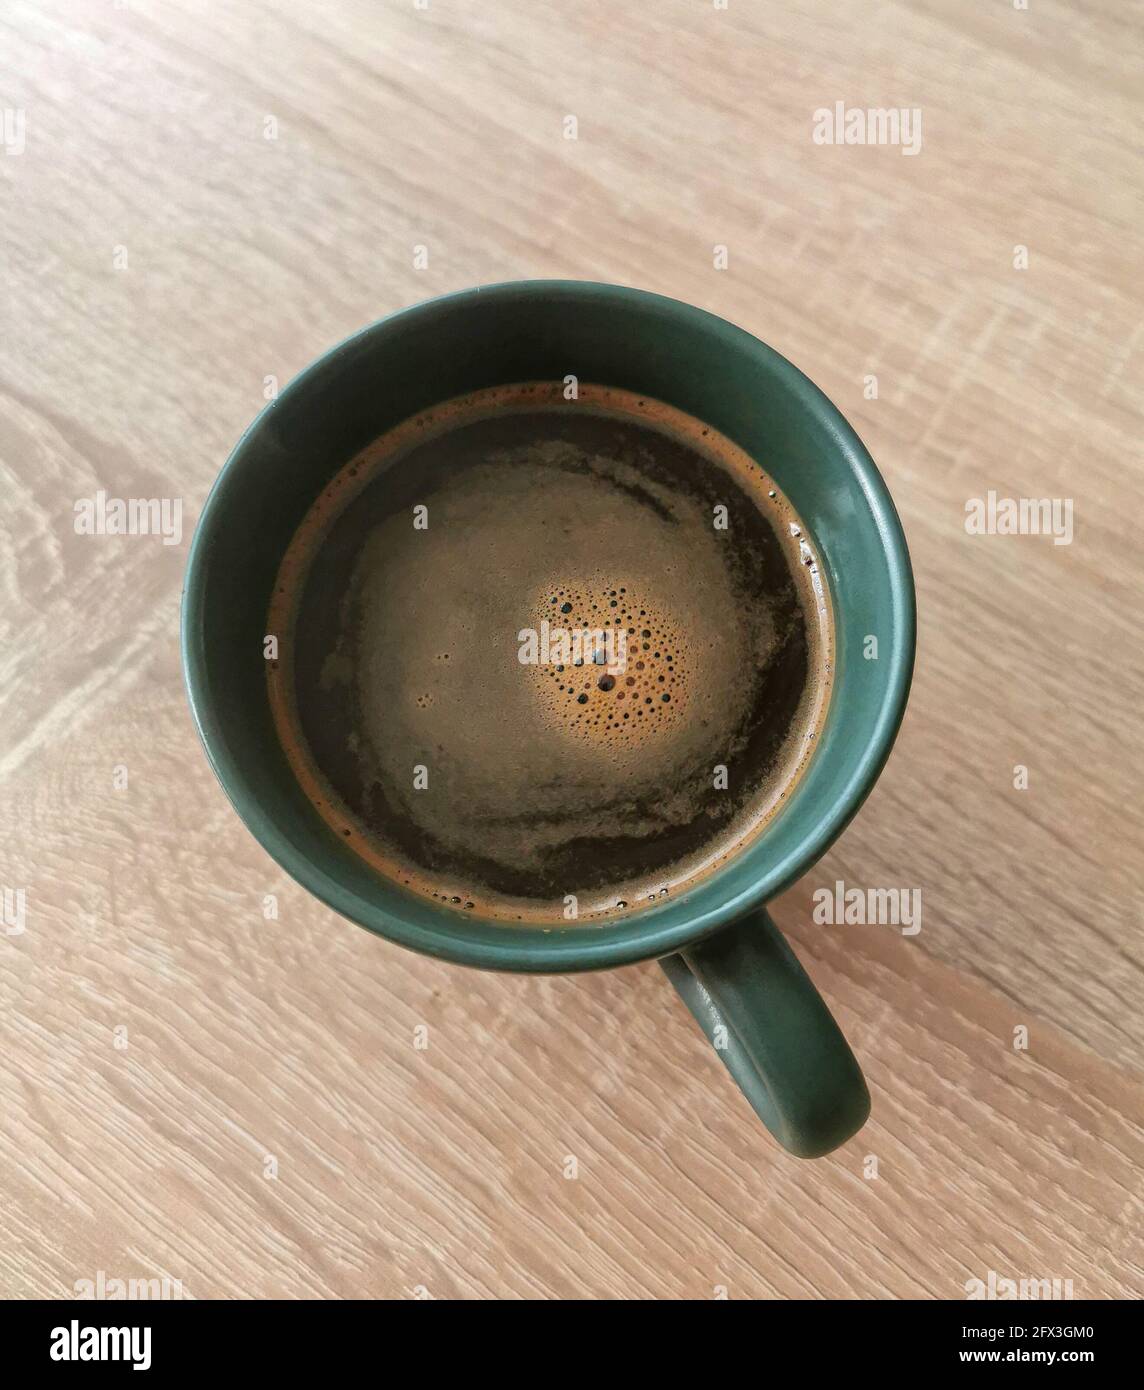 Top view of green cup of black coffee with some bubbles on a wooden table Stock Photo